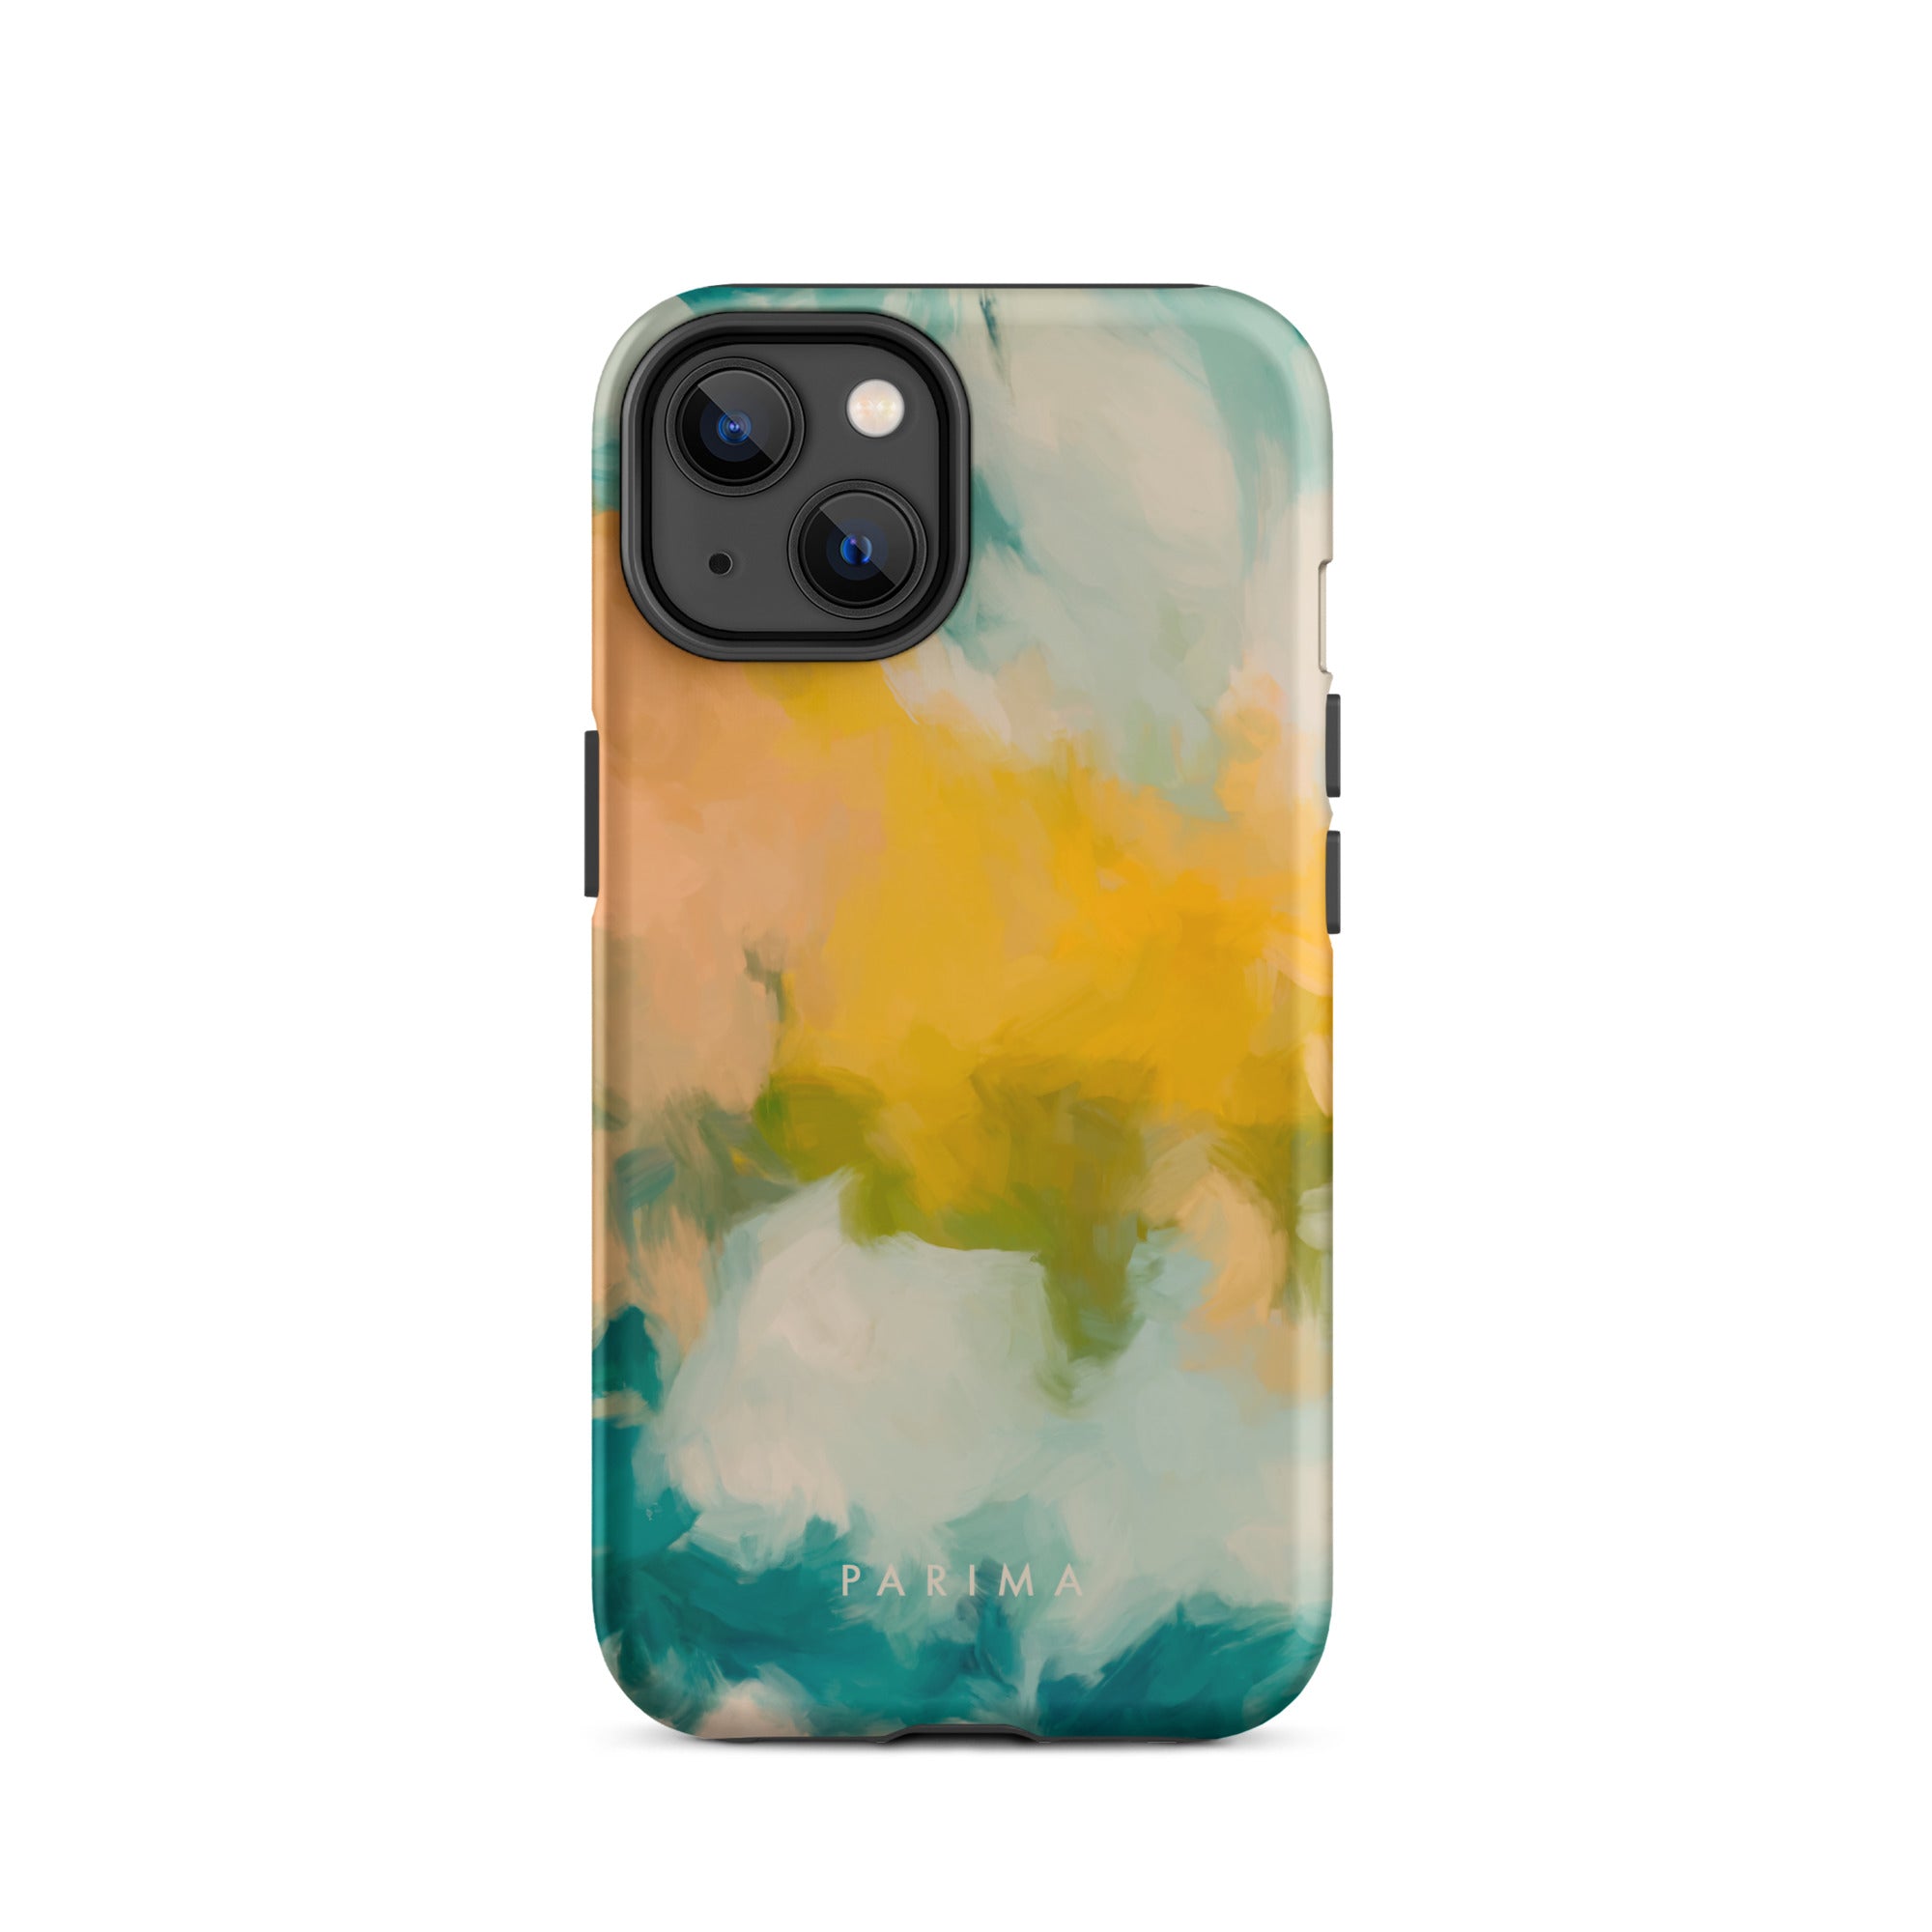 Beach Day, blue and yellow abstract art - iPhone 14 tough case by Parima Studio